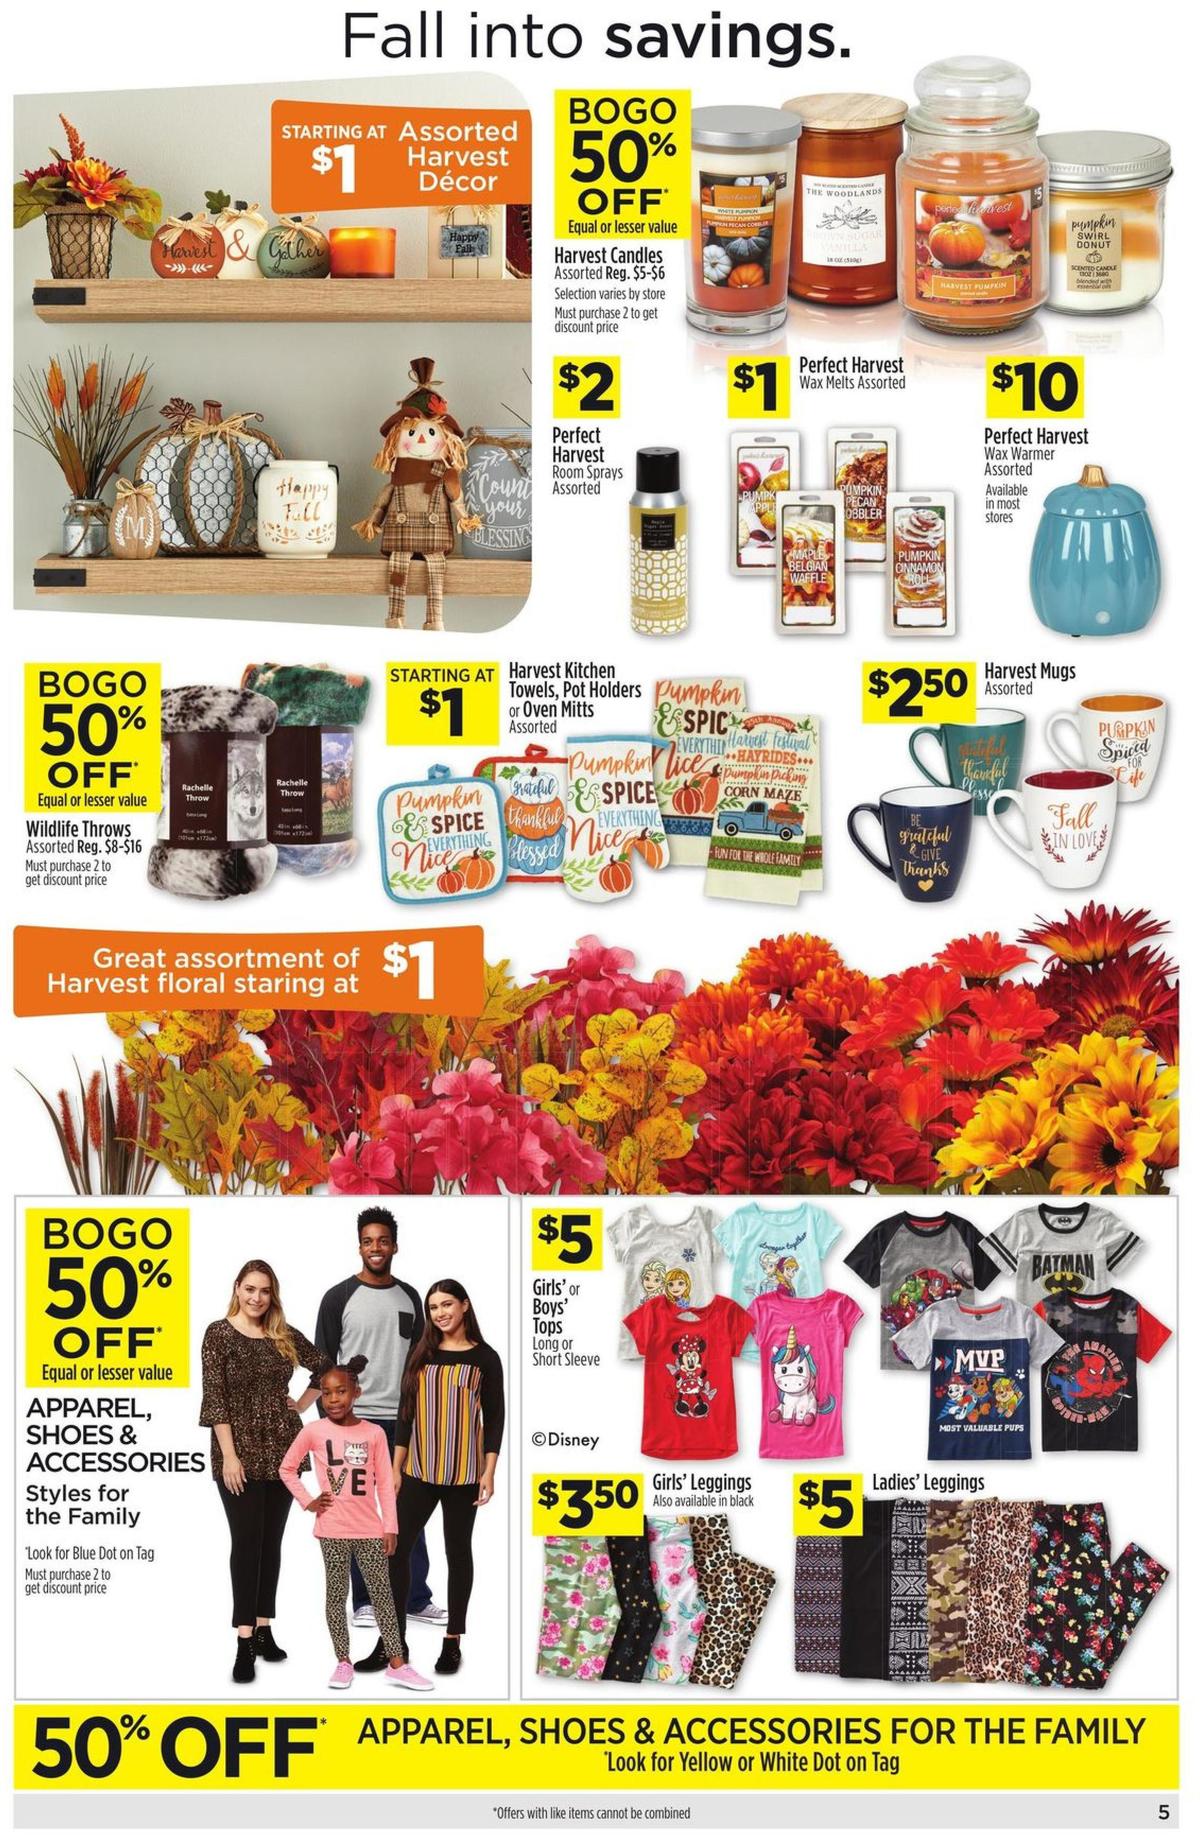 Dollar General Weekly Ad from September 8